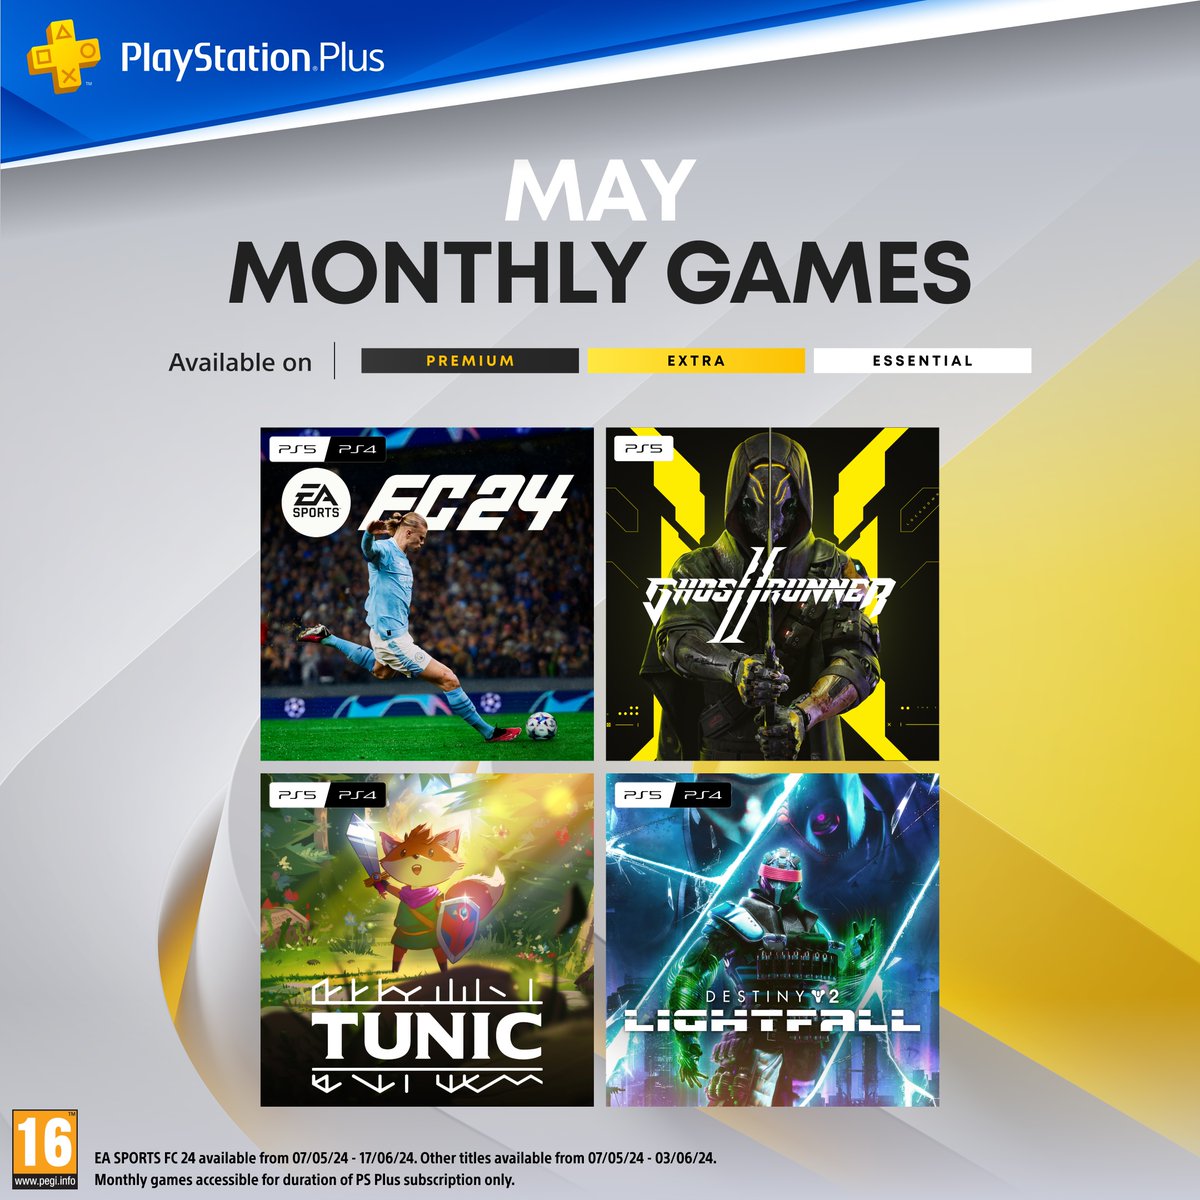 Hit the back of the net in EA Sports FC 24, leading May's PlayStation Plus Monthly Games lineup ⚽

Your new games arrive today: play.st/44vNi1L